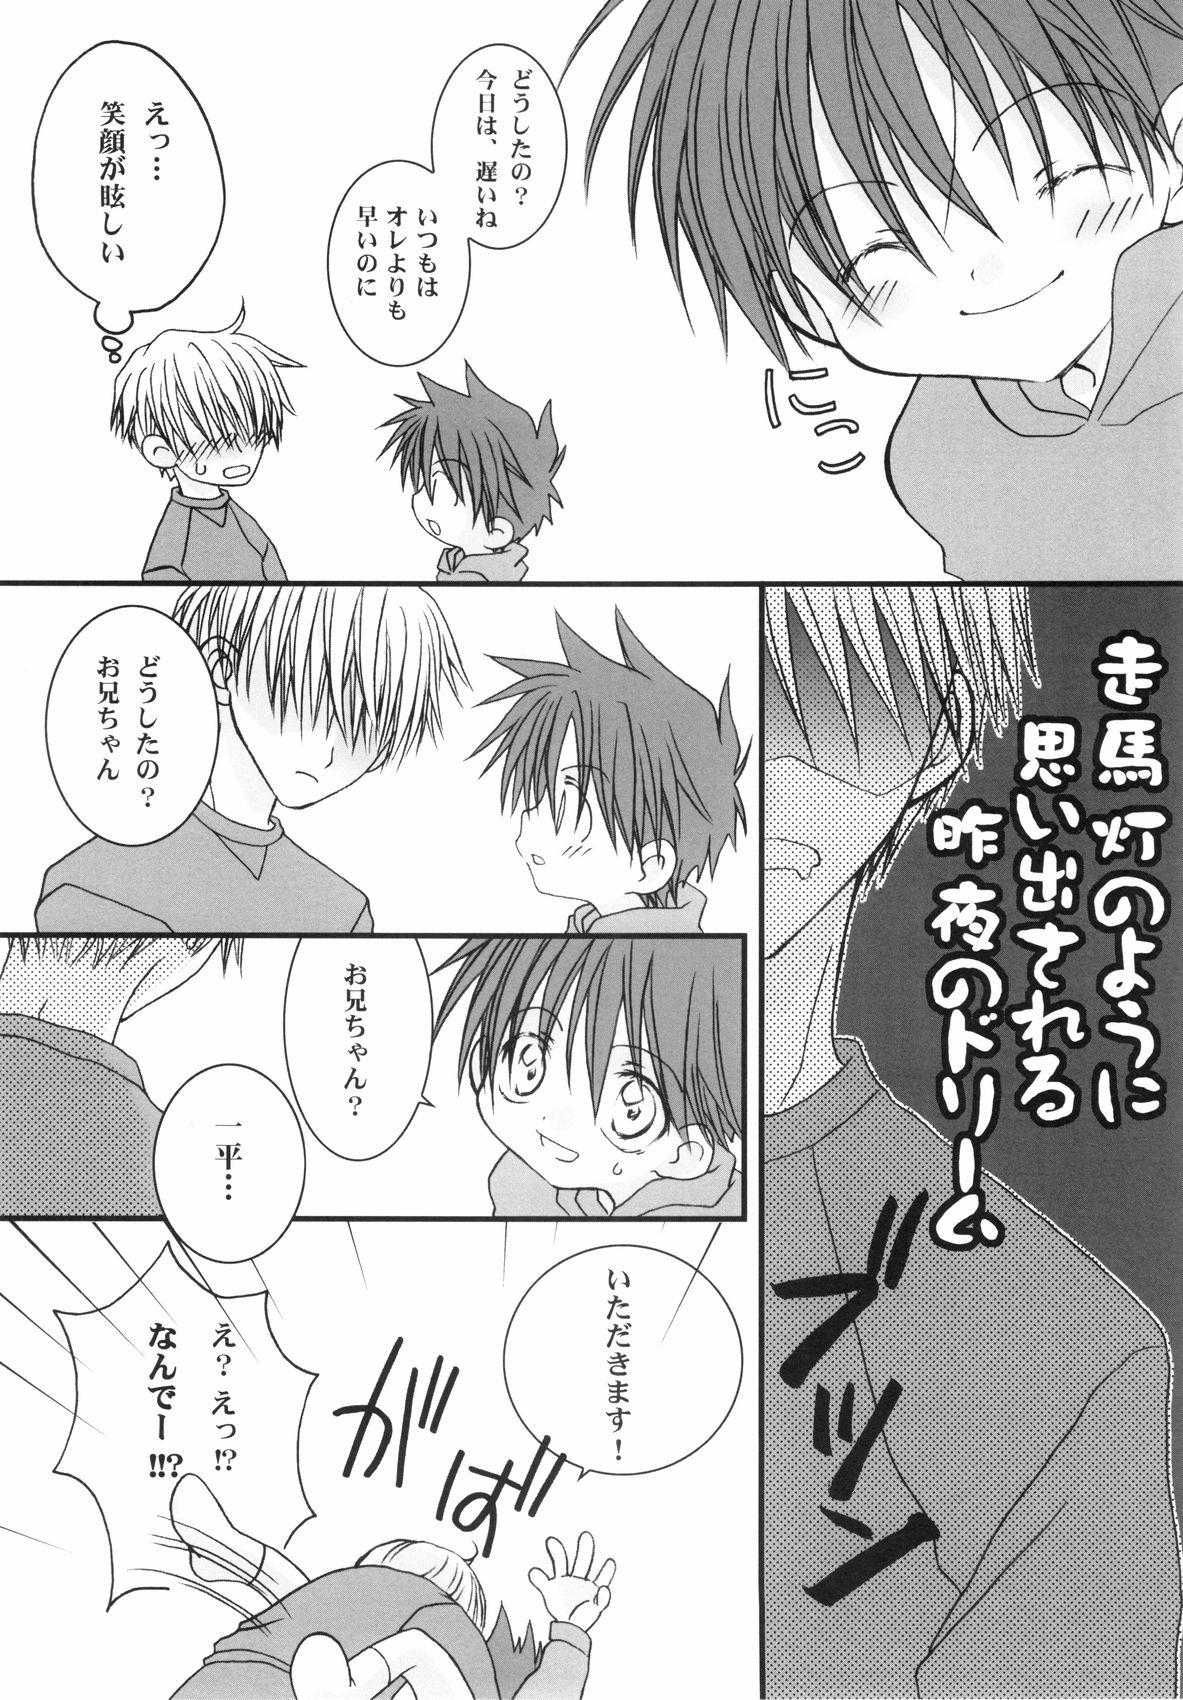 Ippei-chan to Issho! 11